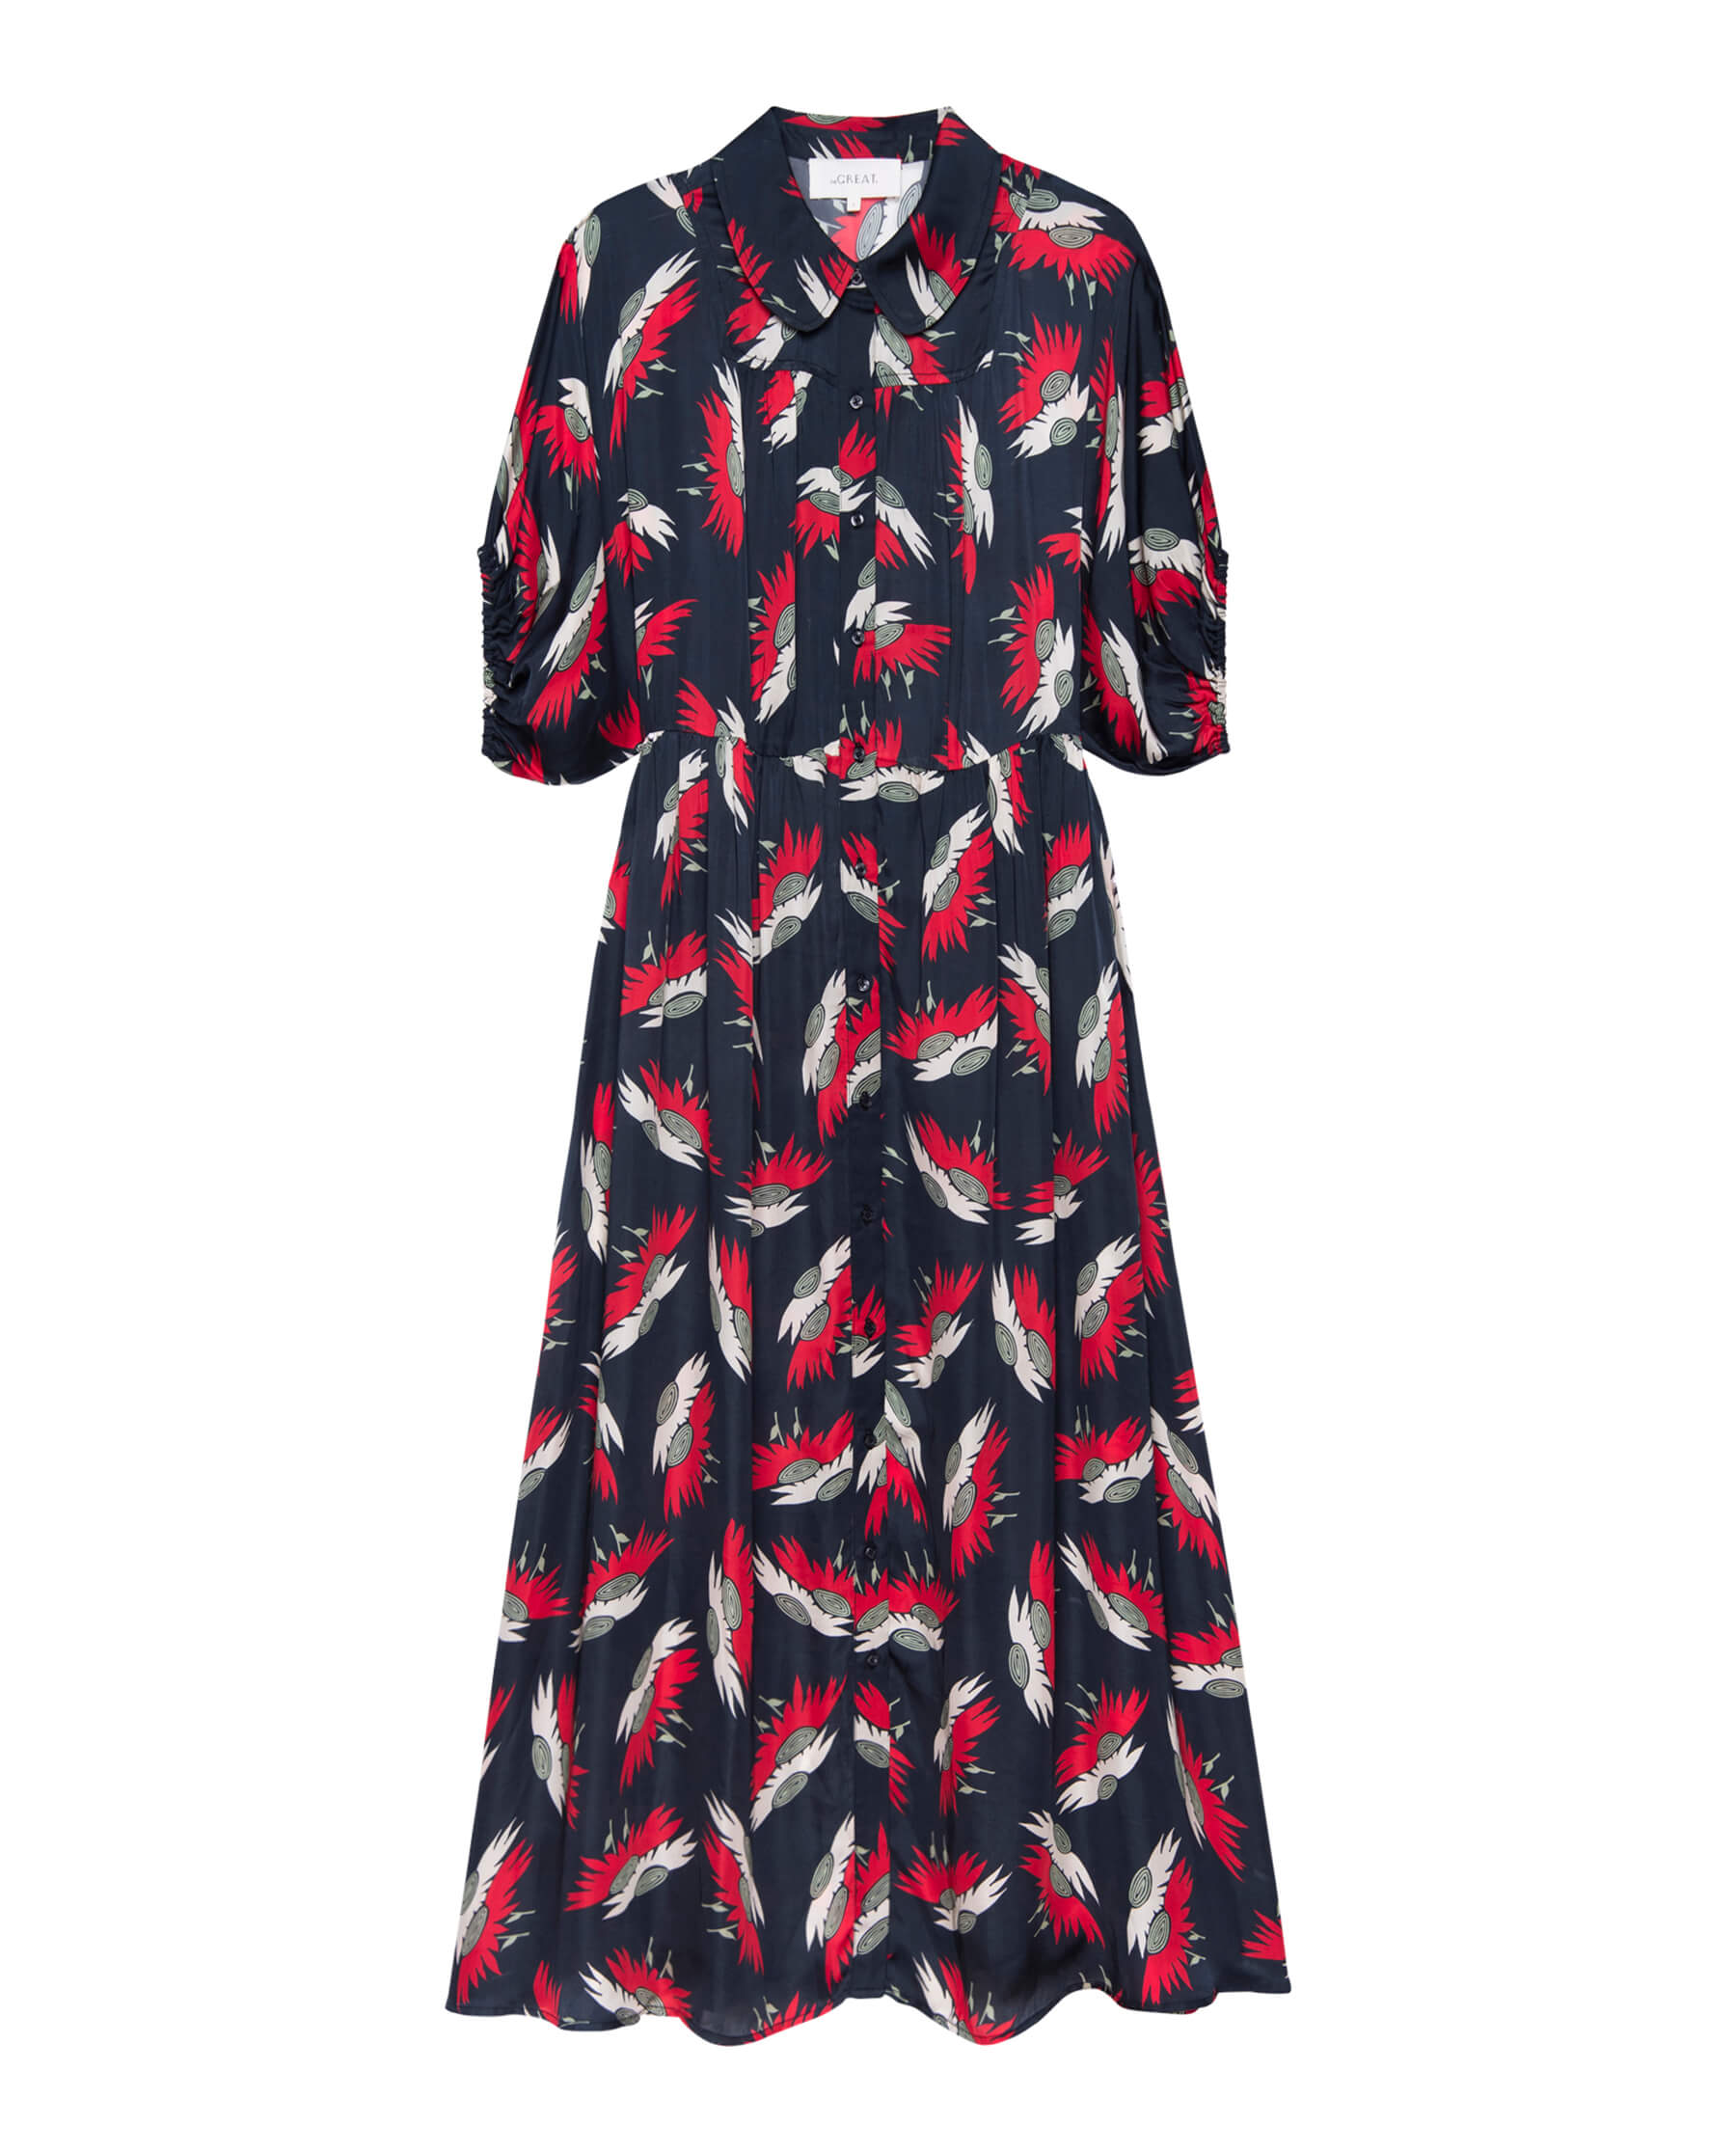 The Great Raven Dress in Navy Birds of Paradise